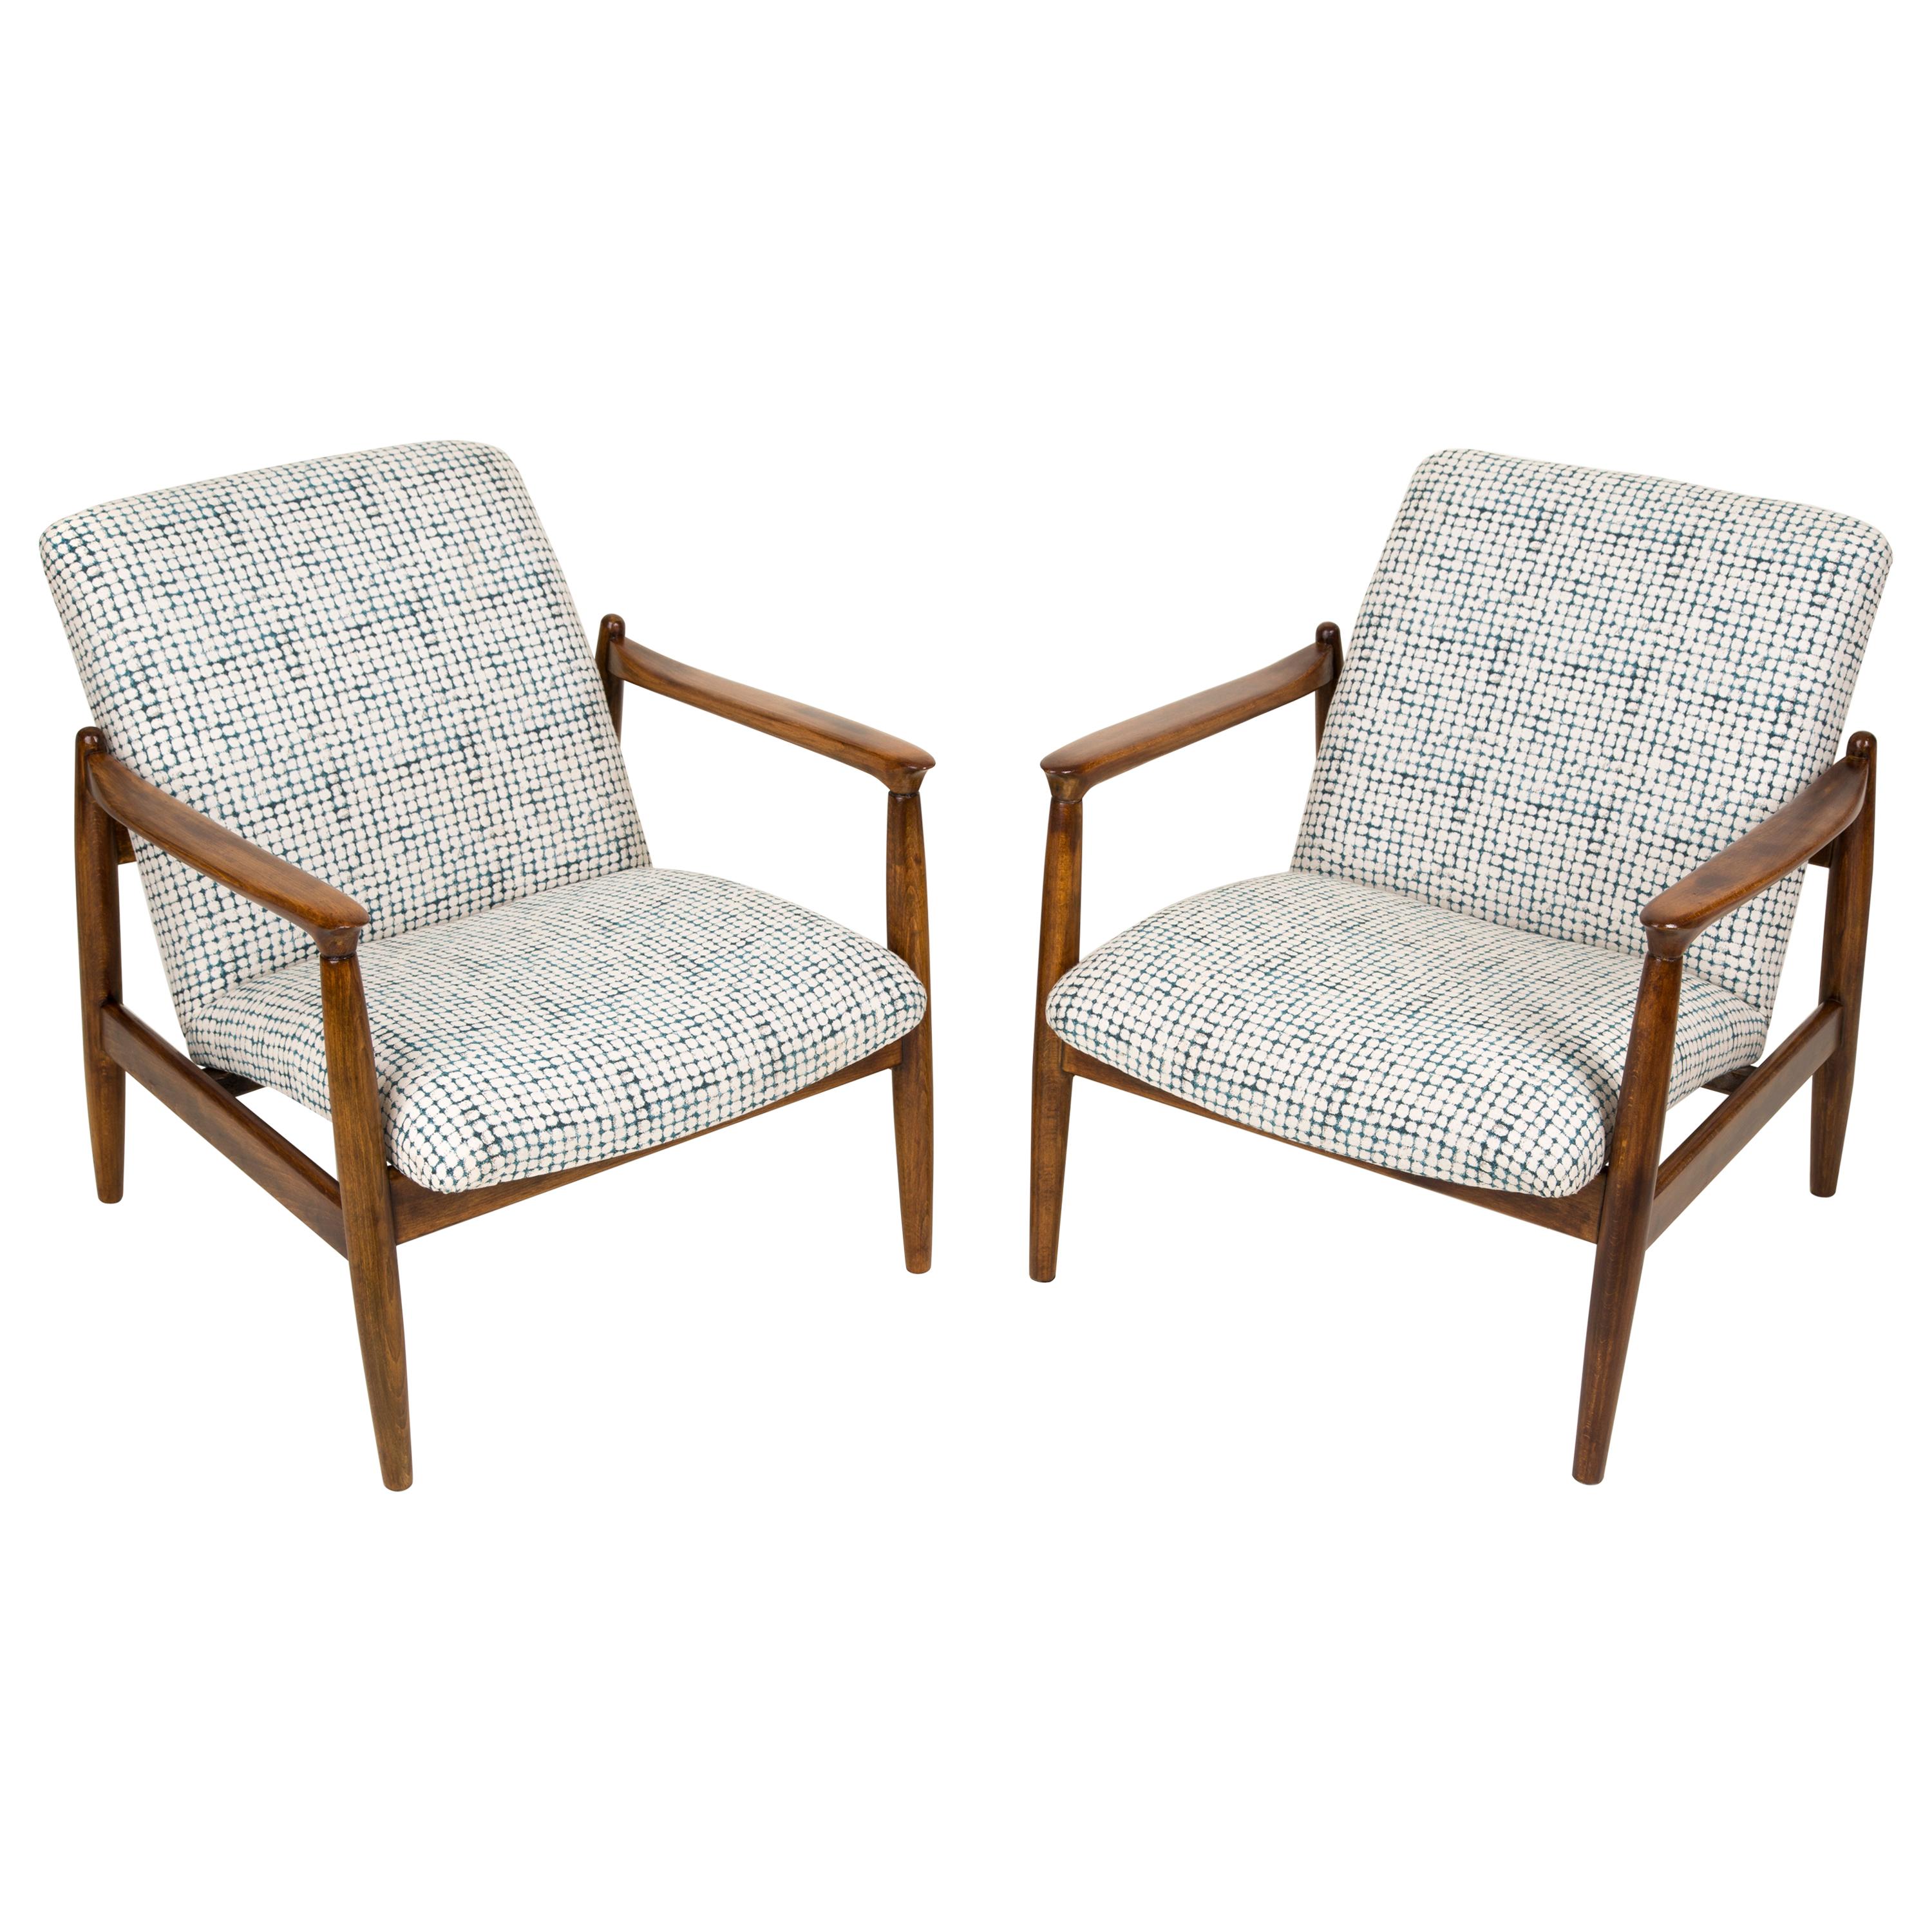 Pair of White and Aqua Vintage Armchairs, Edmund Homa, 1960s For Sale